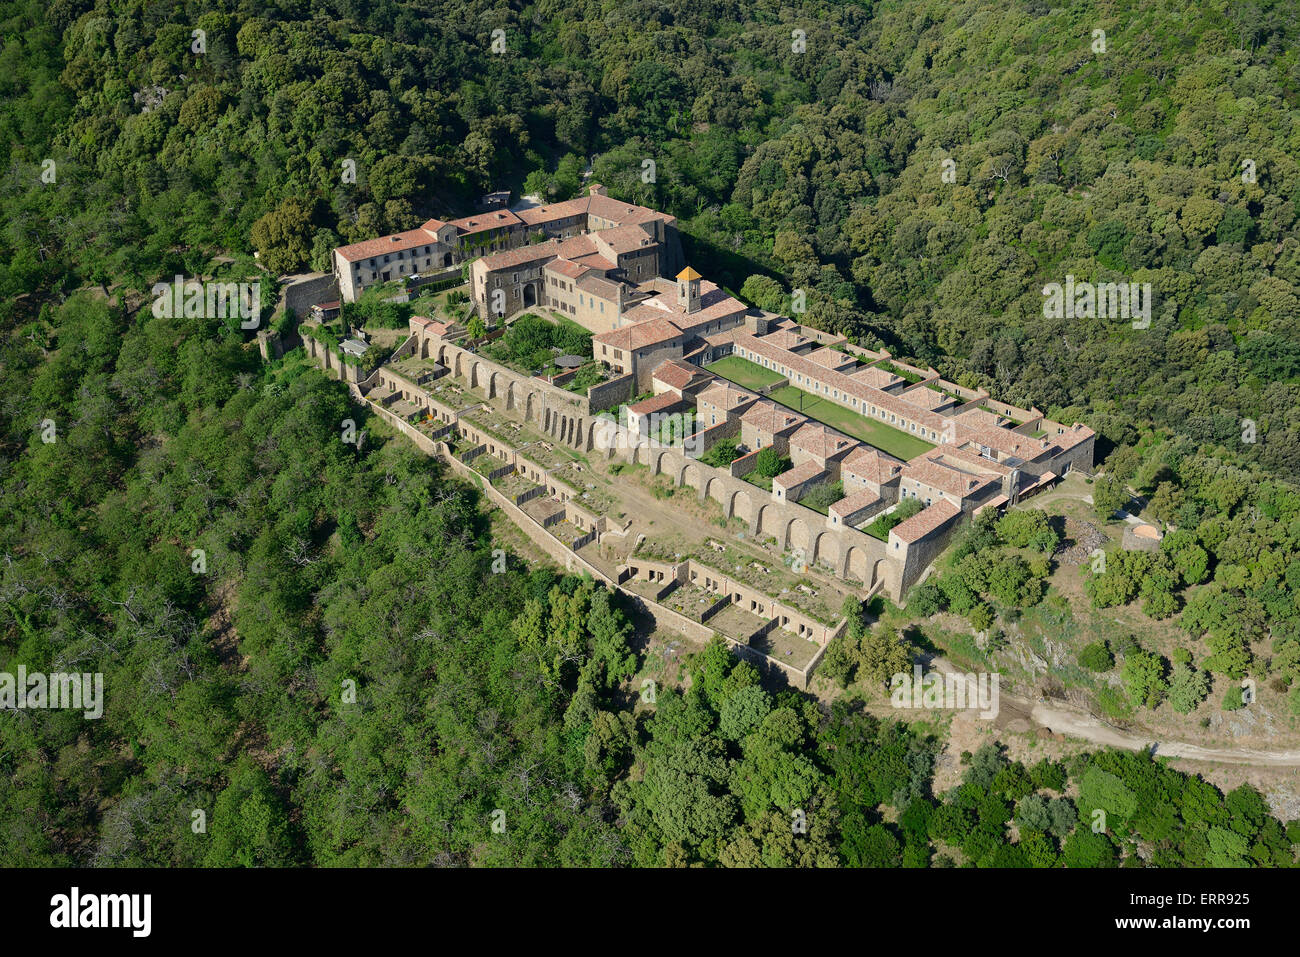 AERIAL VIEW. Monastery isolated in a mountainous area. La Verne Charterhouse, Collobrières, Var, French Riviera's backcountry, France. Stock Photo